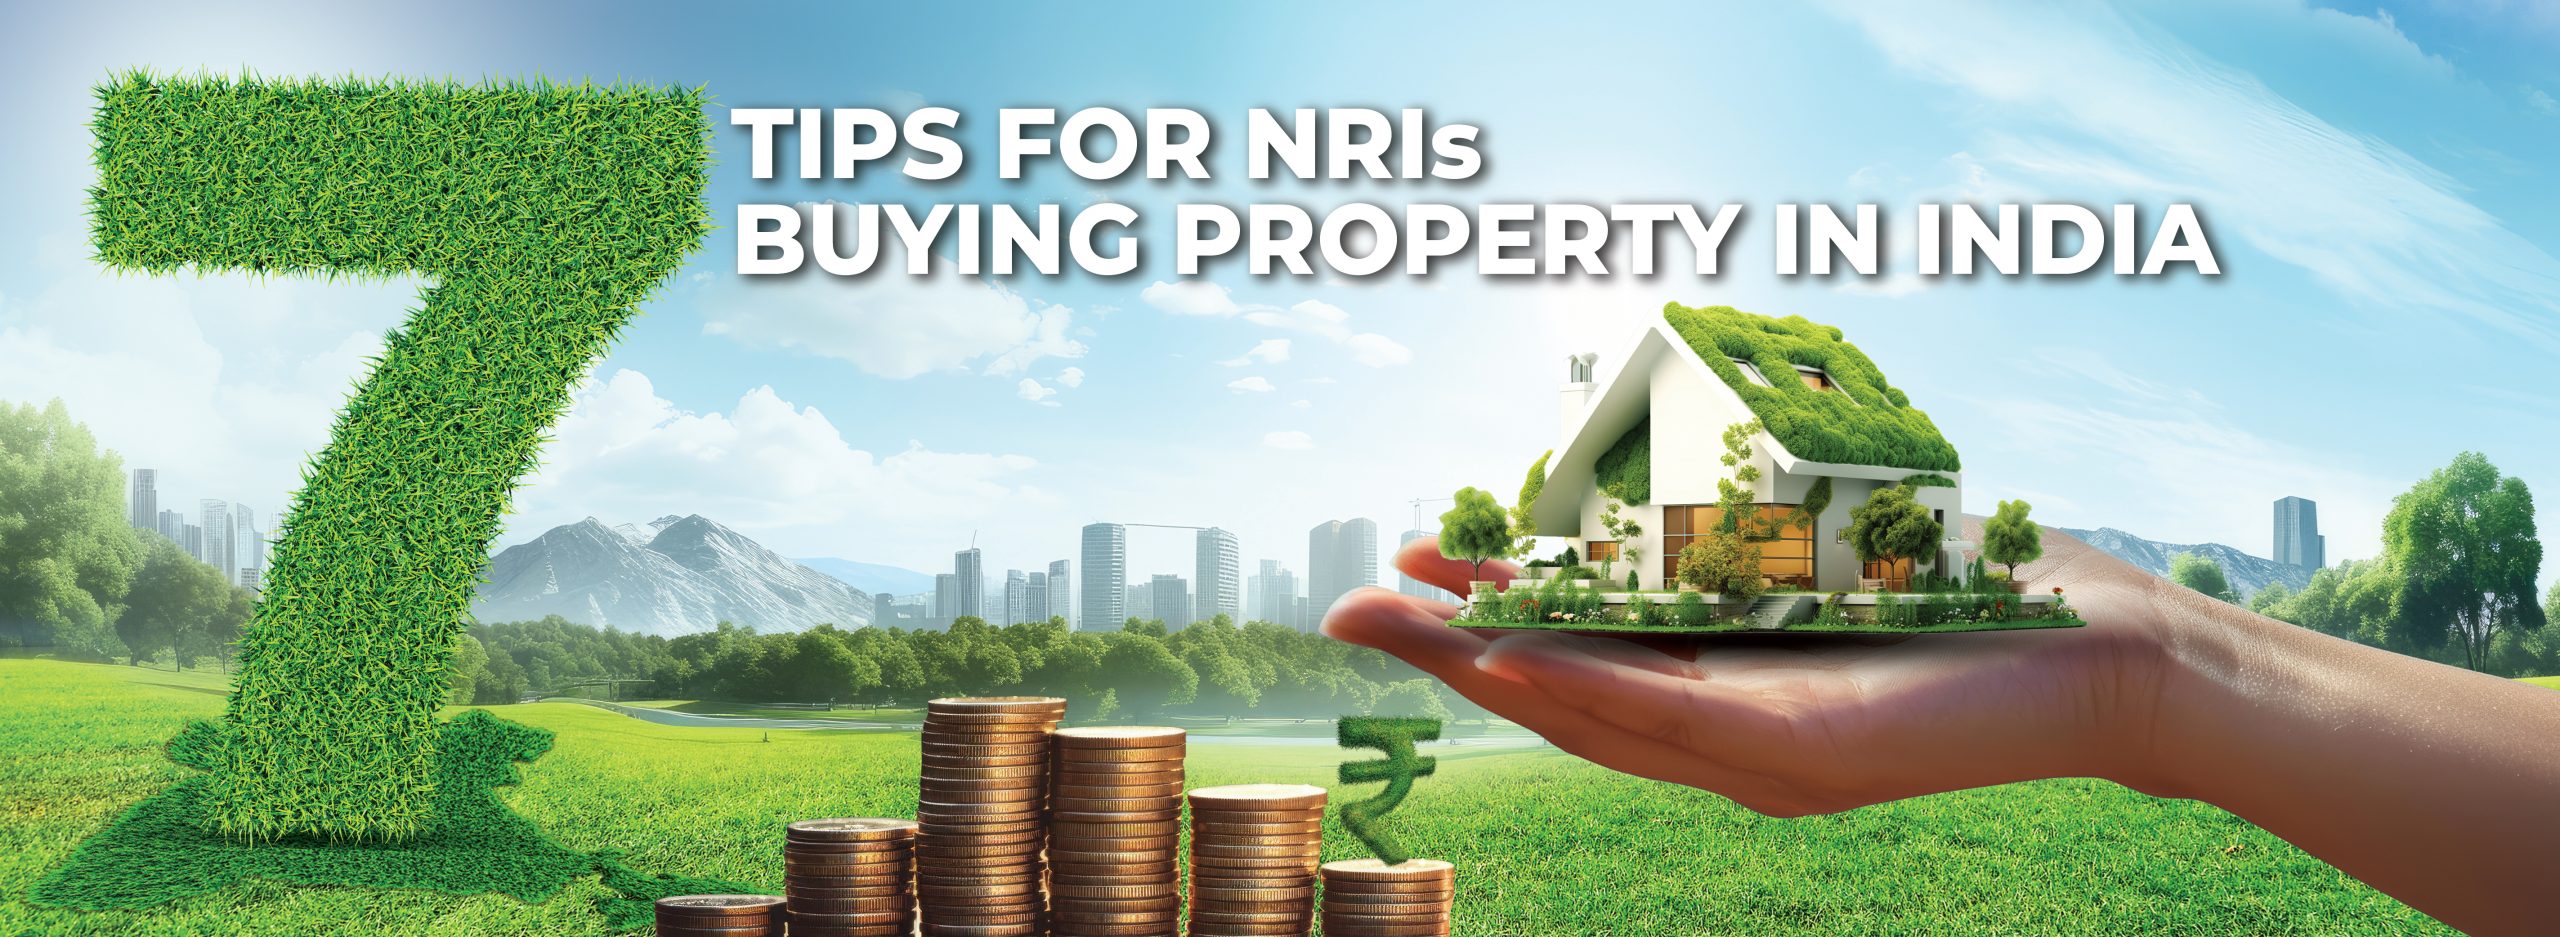 7 Tips for NRIs buying Property in India  